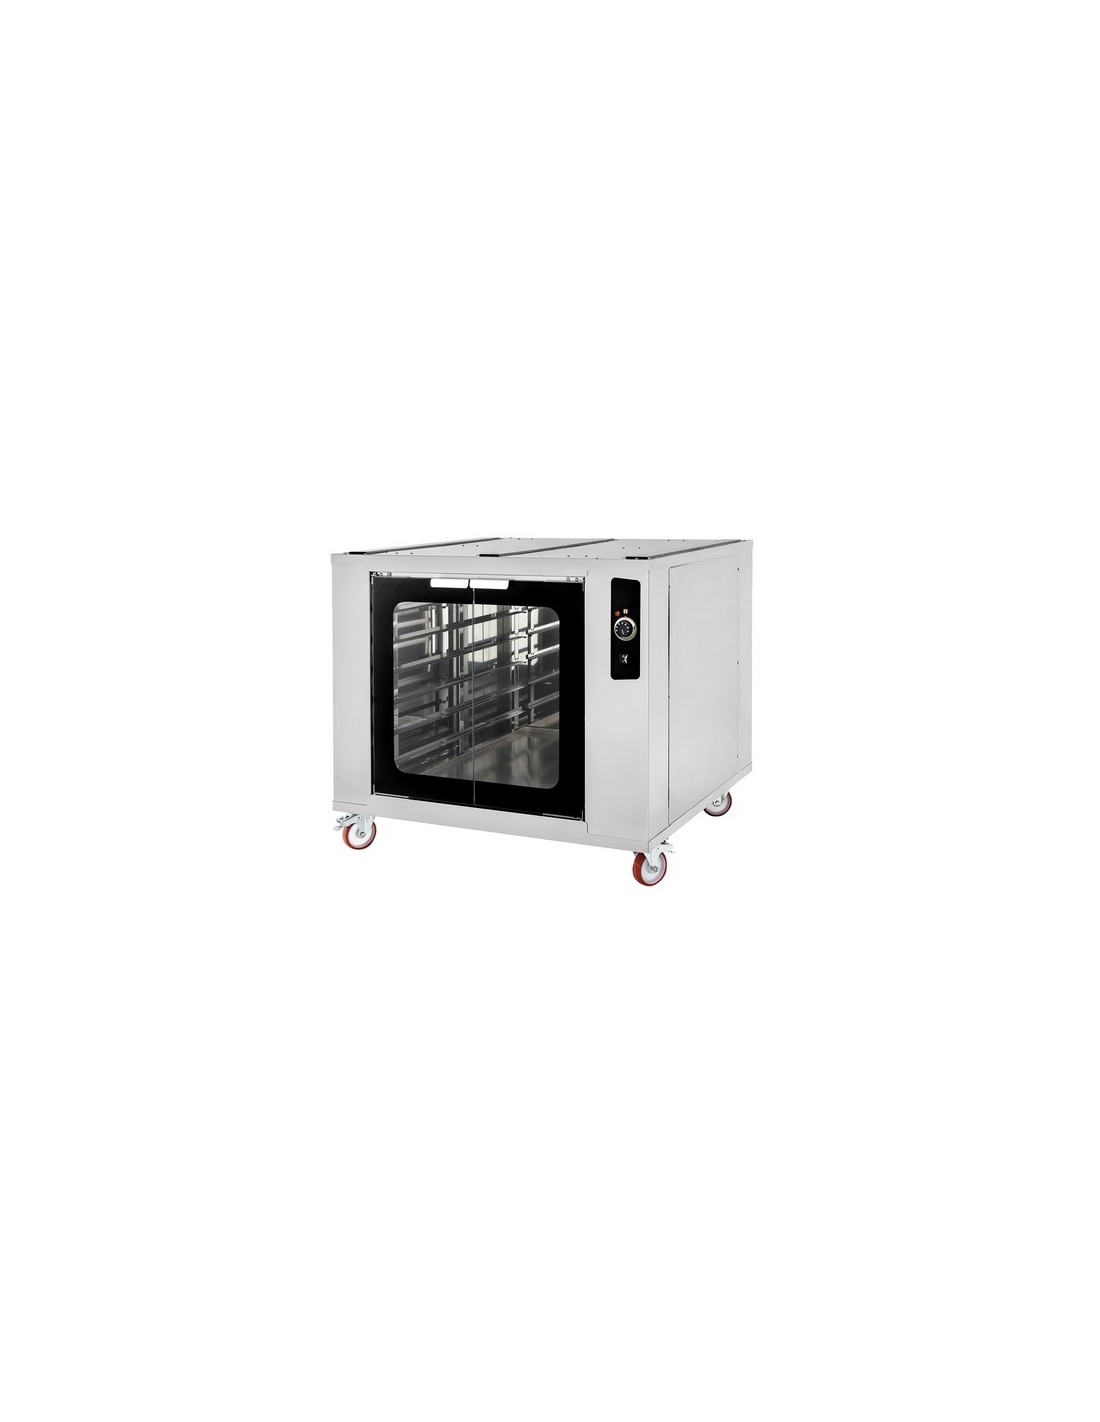 Leaving Cell - For TRAYS ovens - Contains 12 40 x 60 cm pans - Combined with Trays ovens